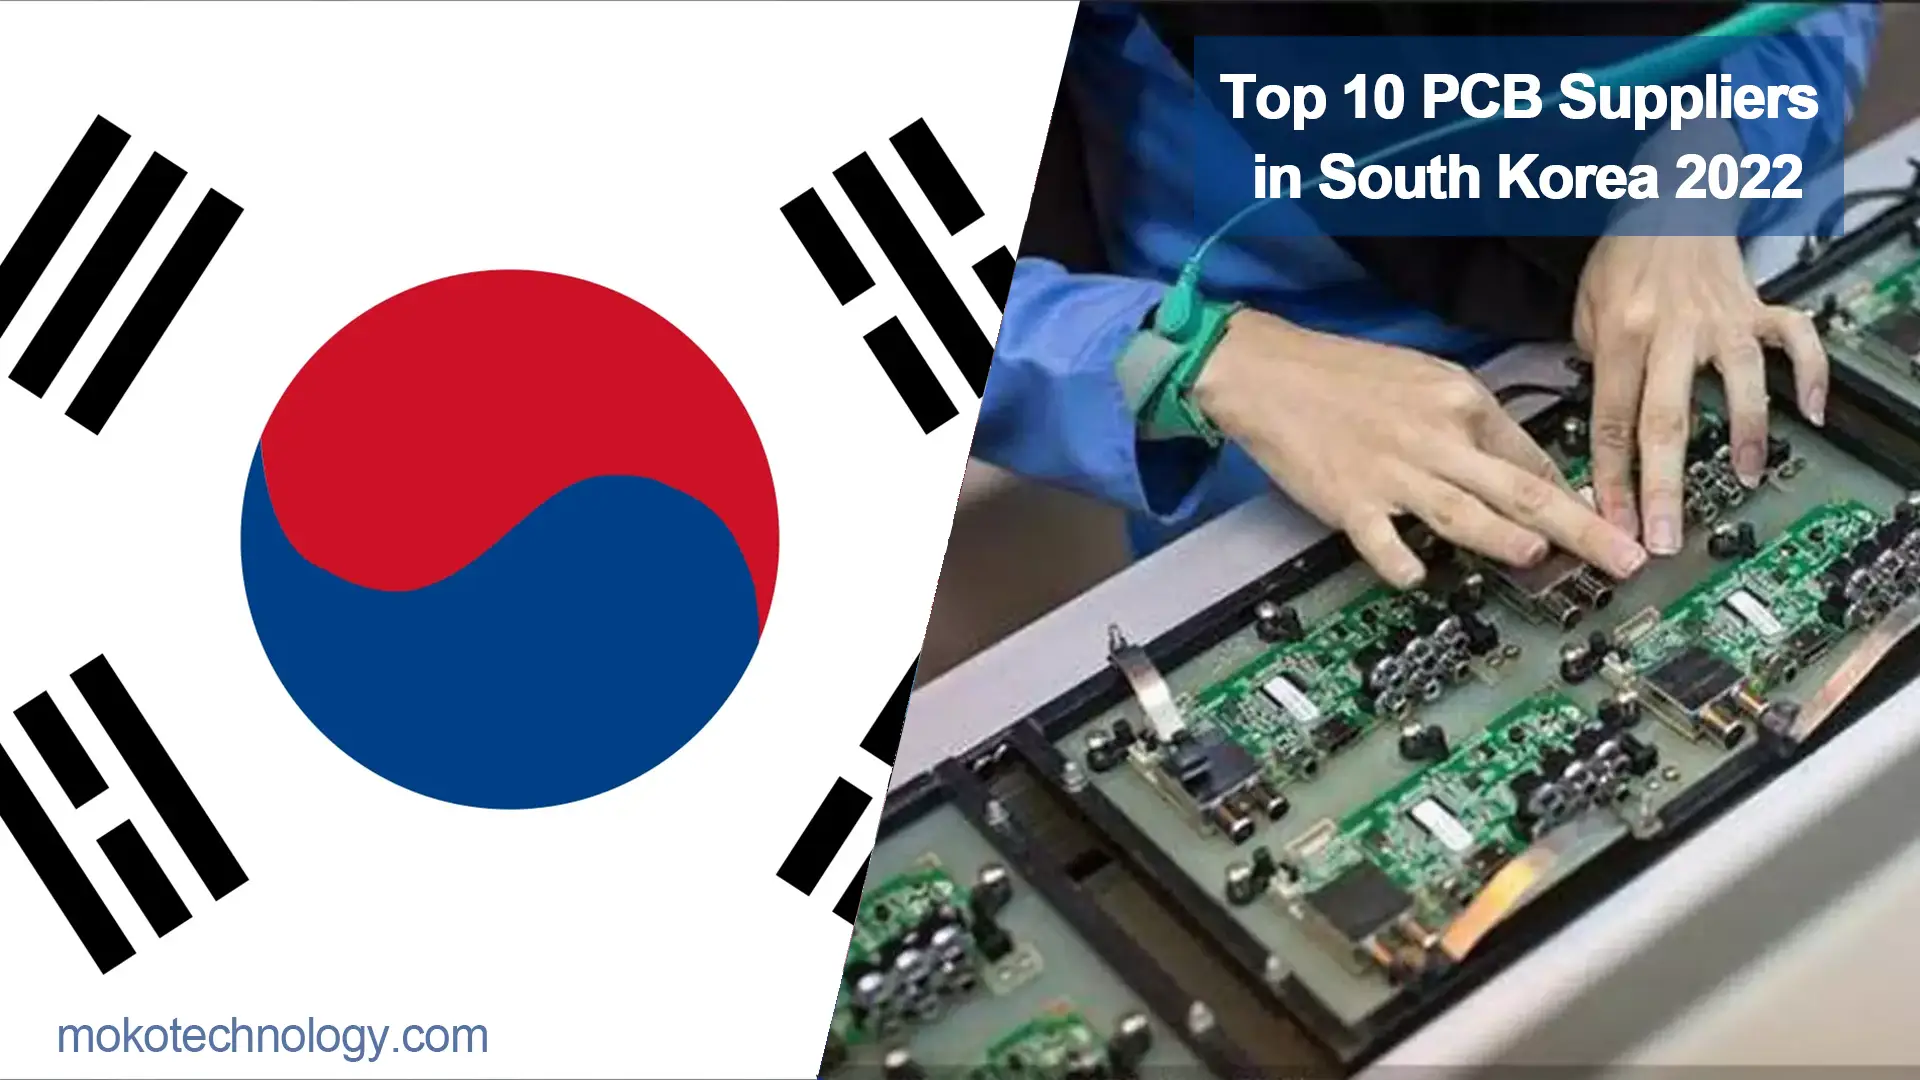 Toppur 10 PCB Suppliers in South Korea 2022